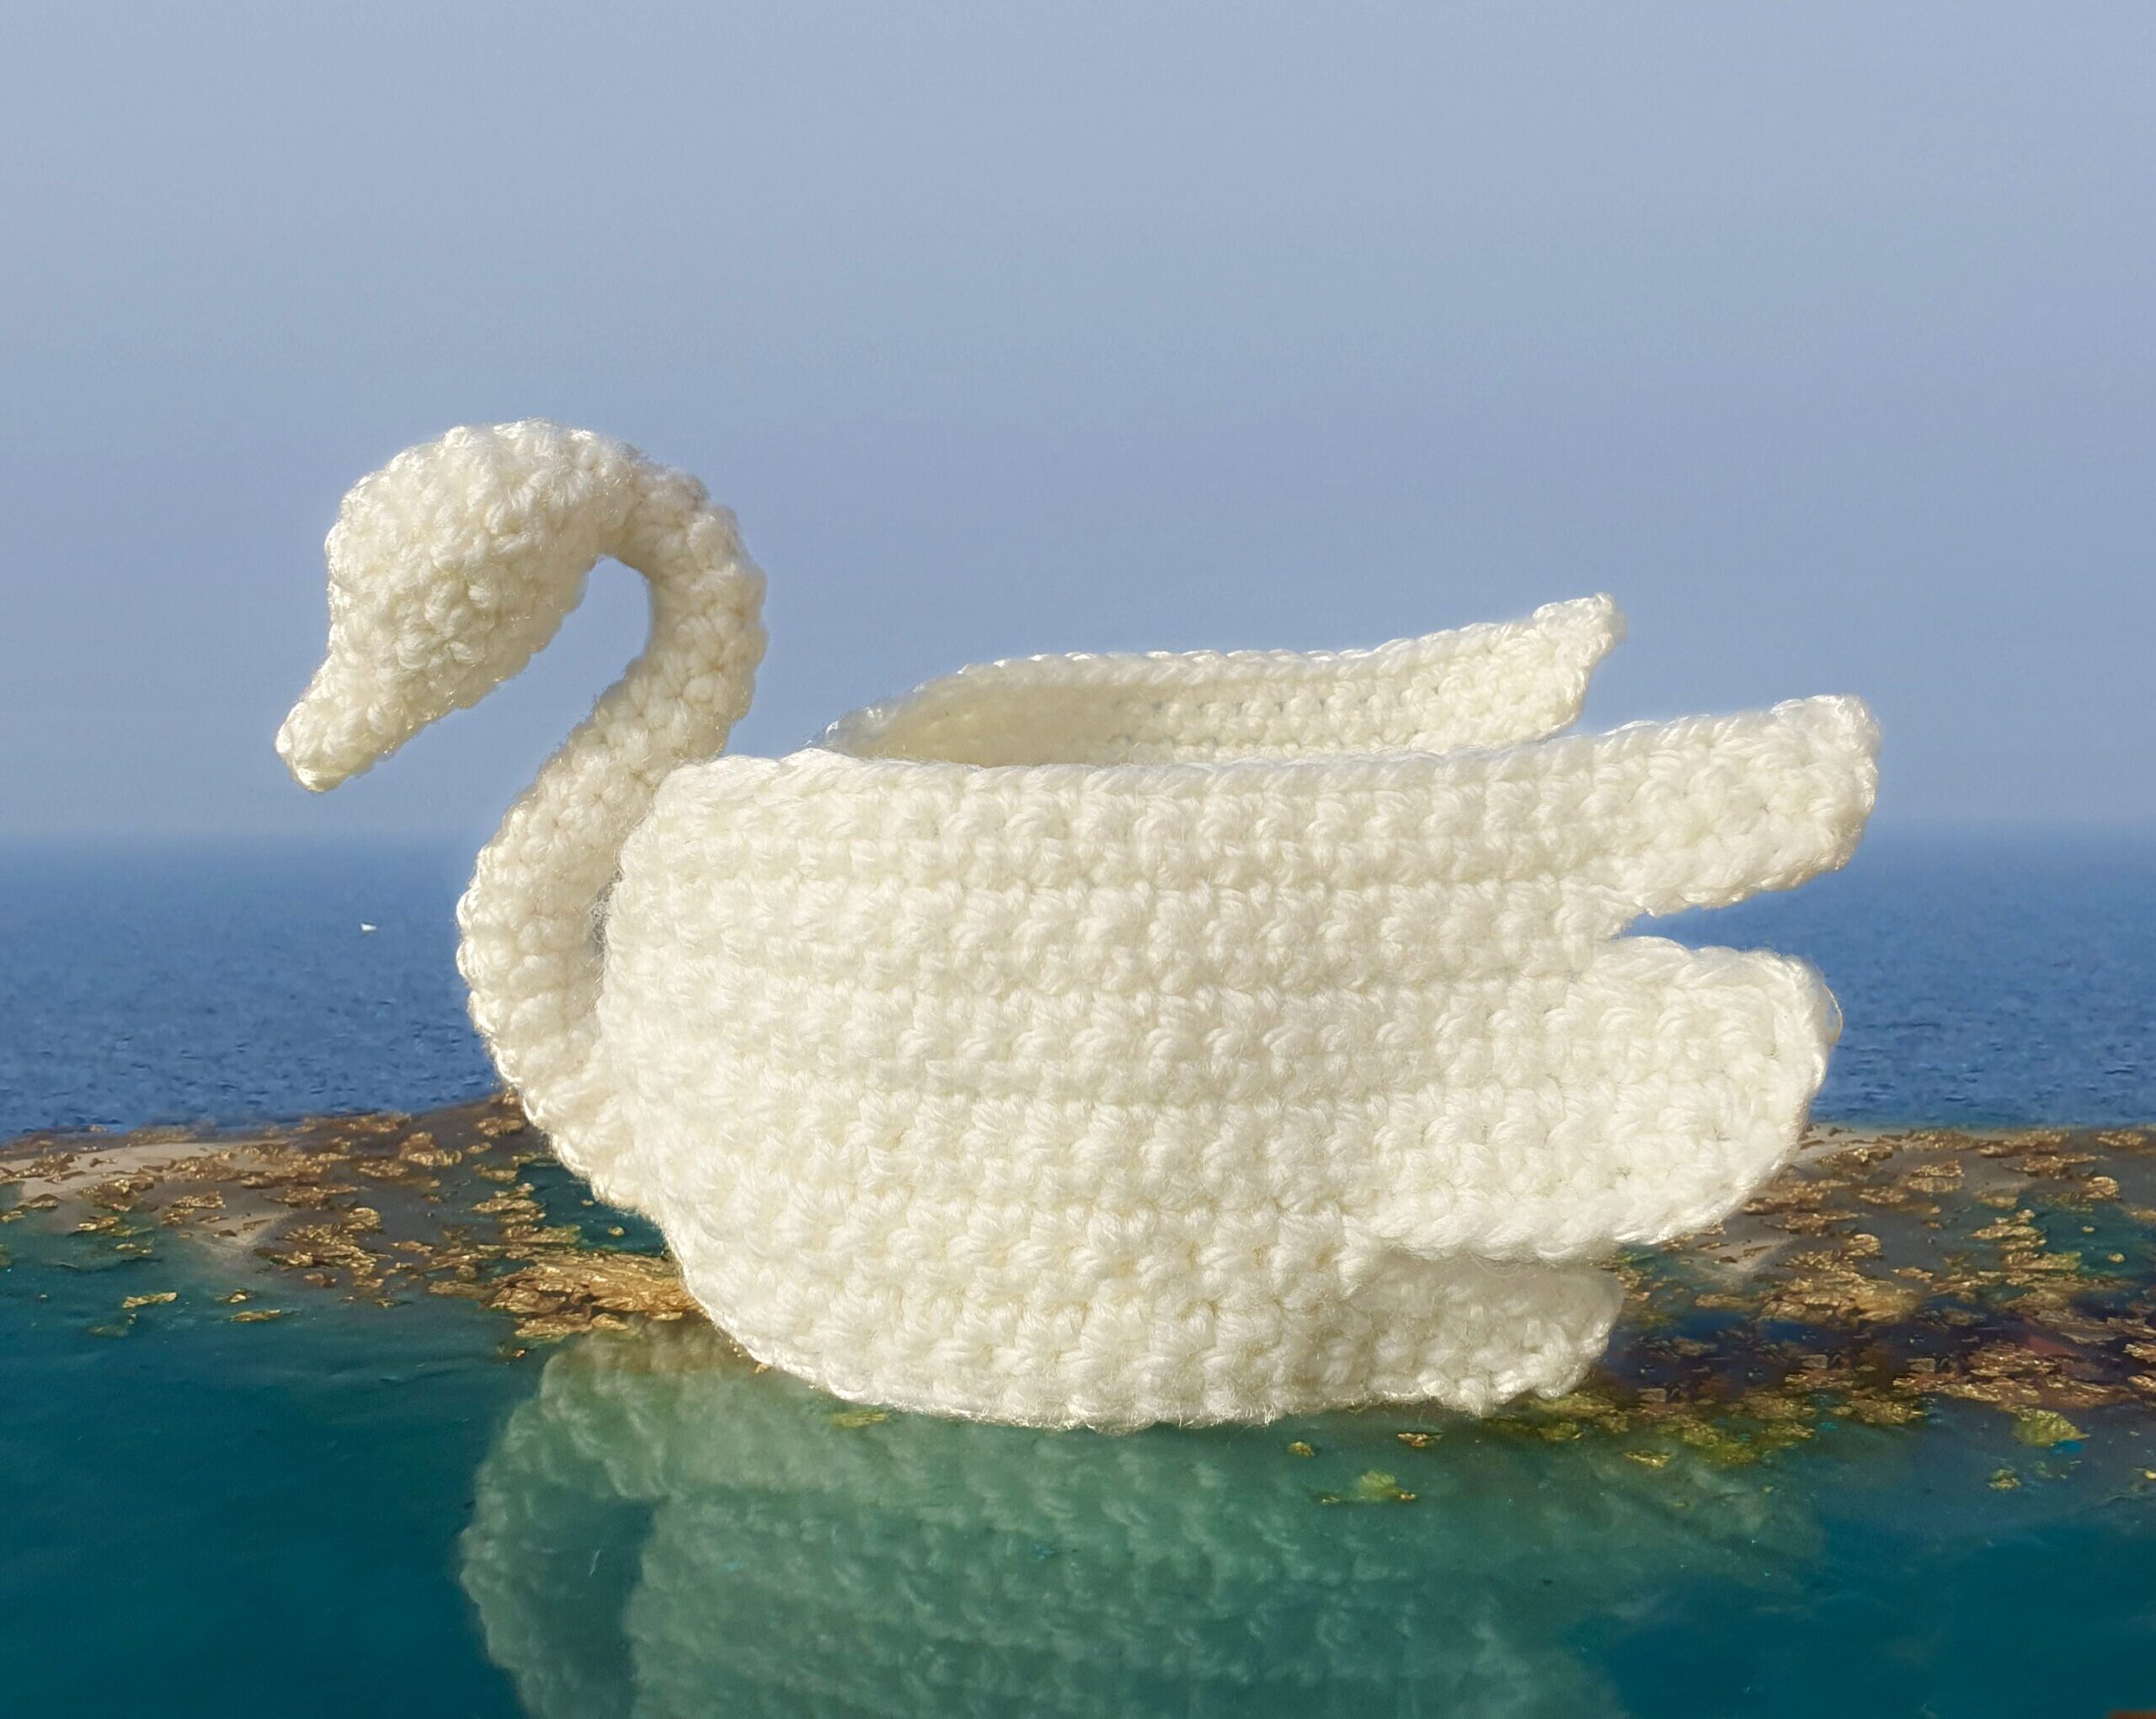 Crochet this Swan coaster / tray now with me